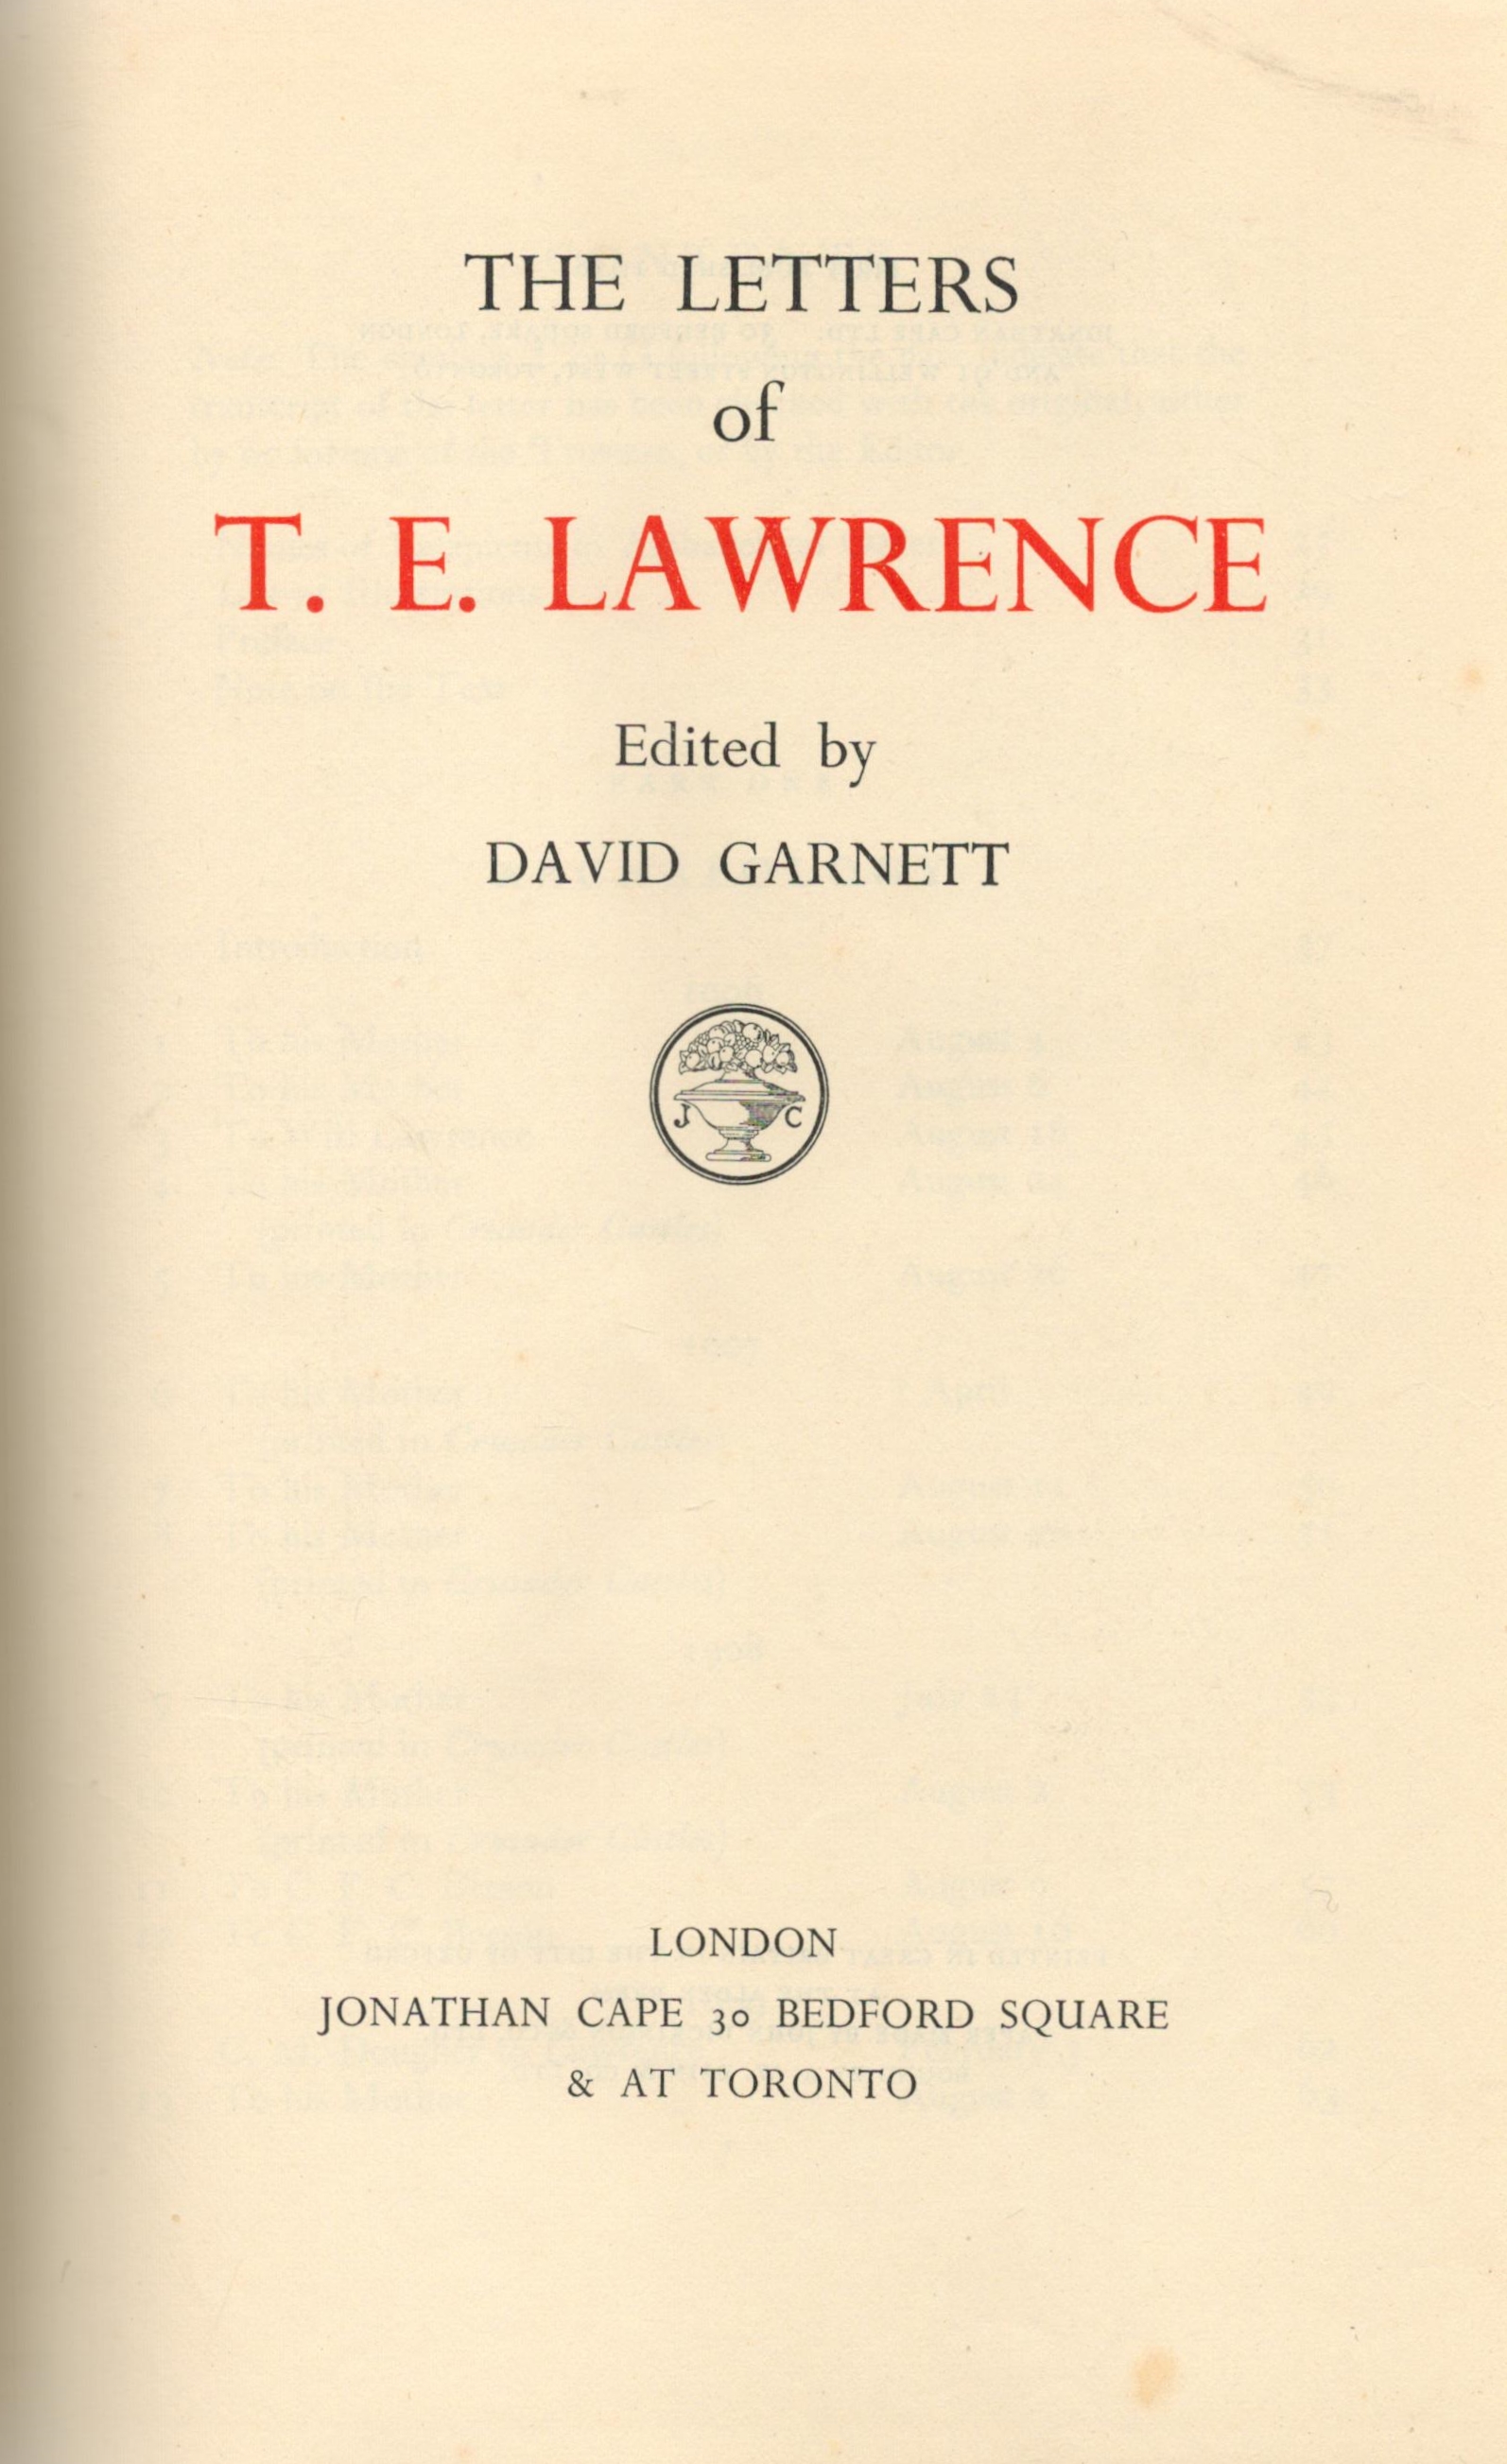 The Letters of T E Lawrence edited by David Garnett Hardback Book 1938 First Edition published by - Image 2 of 3